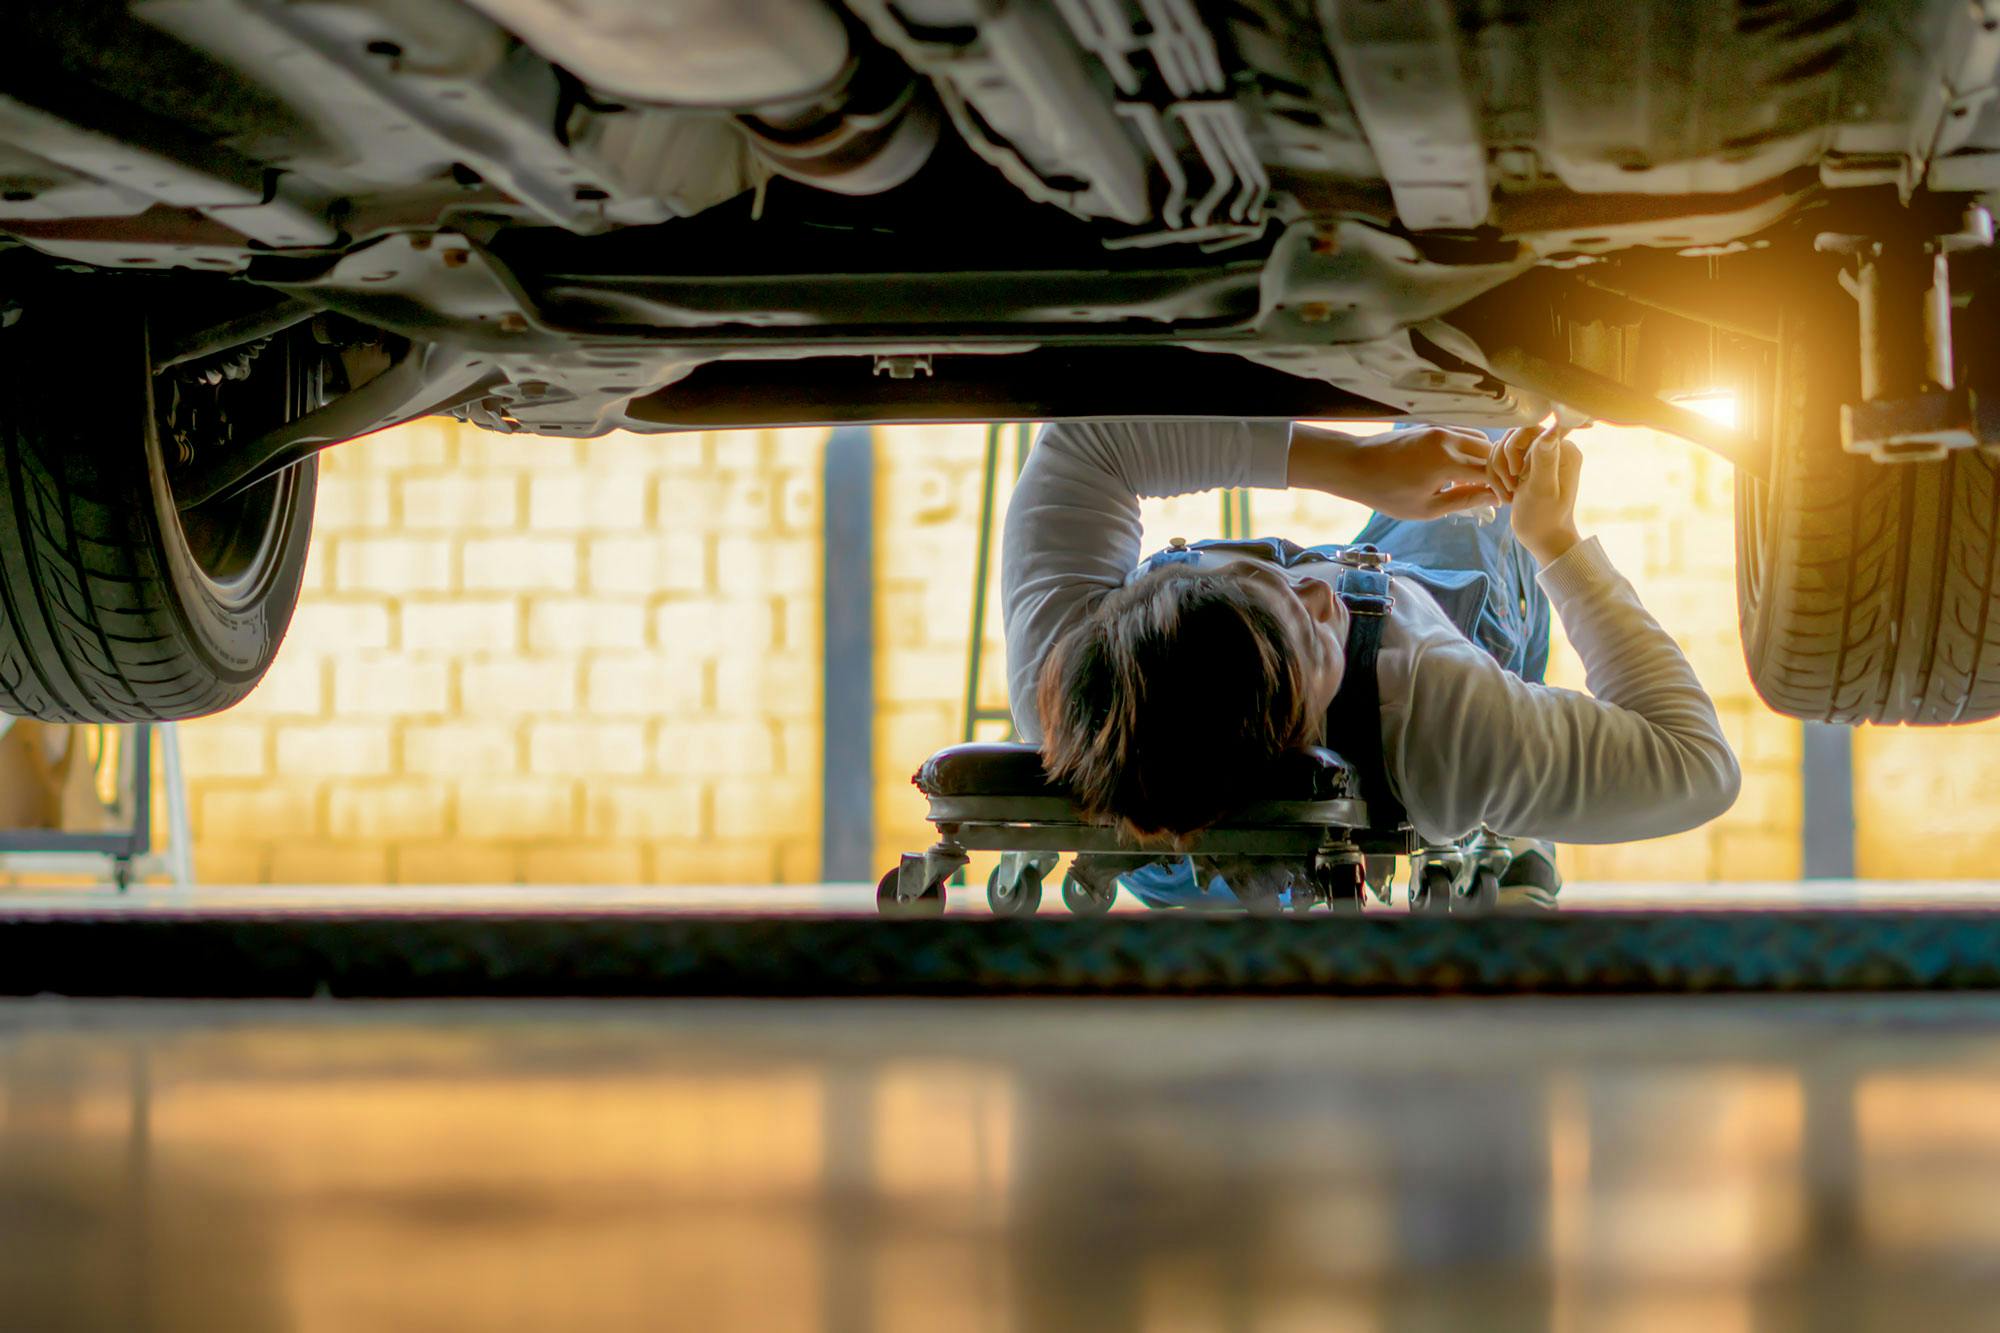 Servicing your car